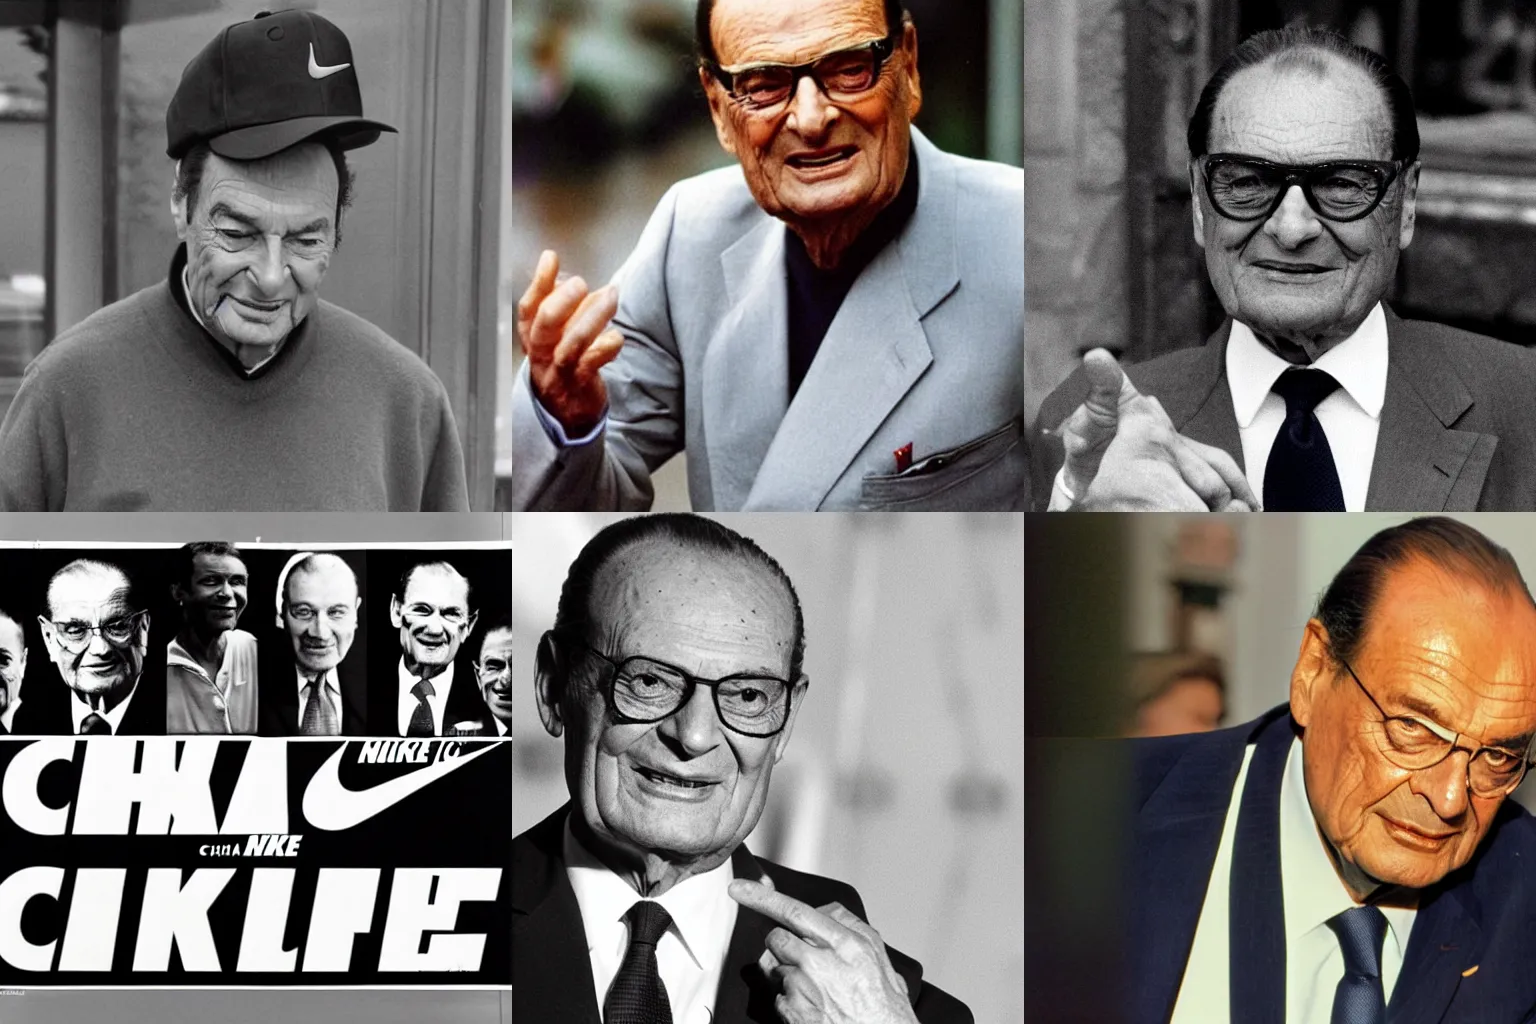 Prompt: Chirac by Nike